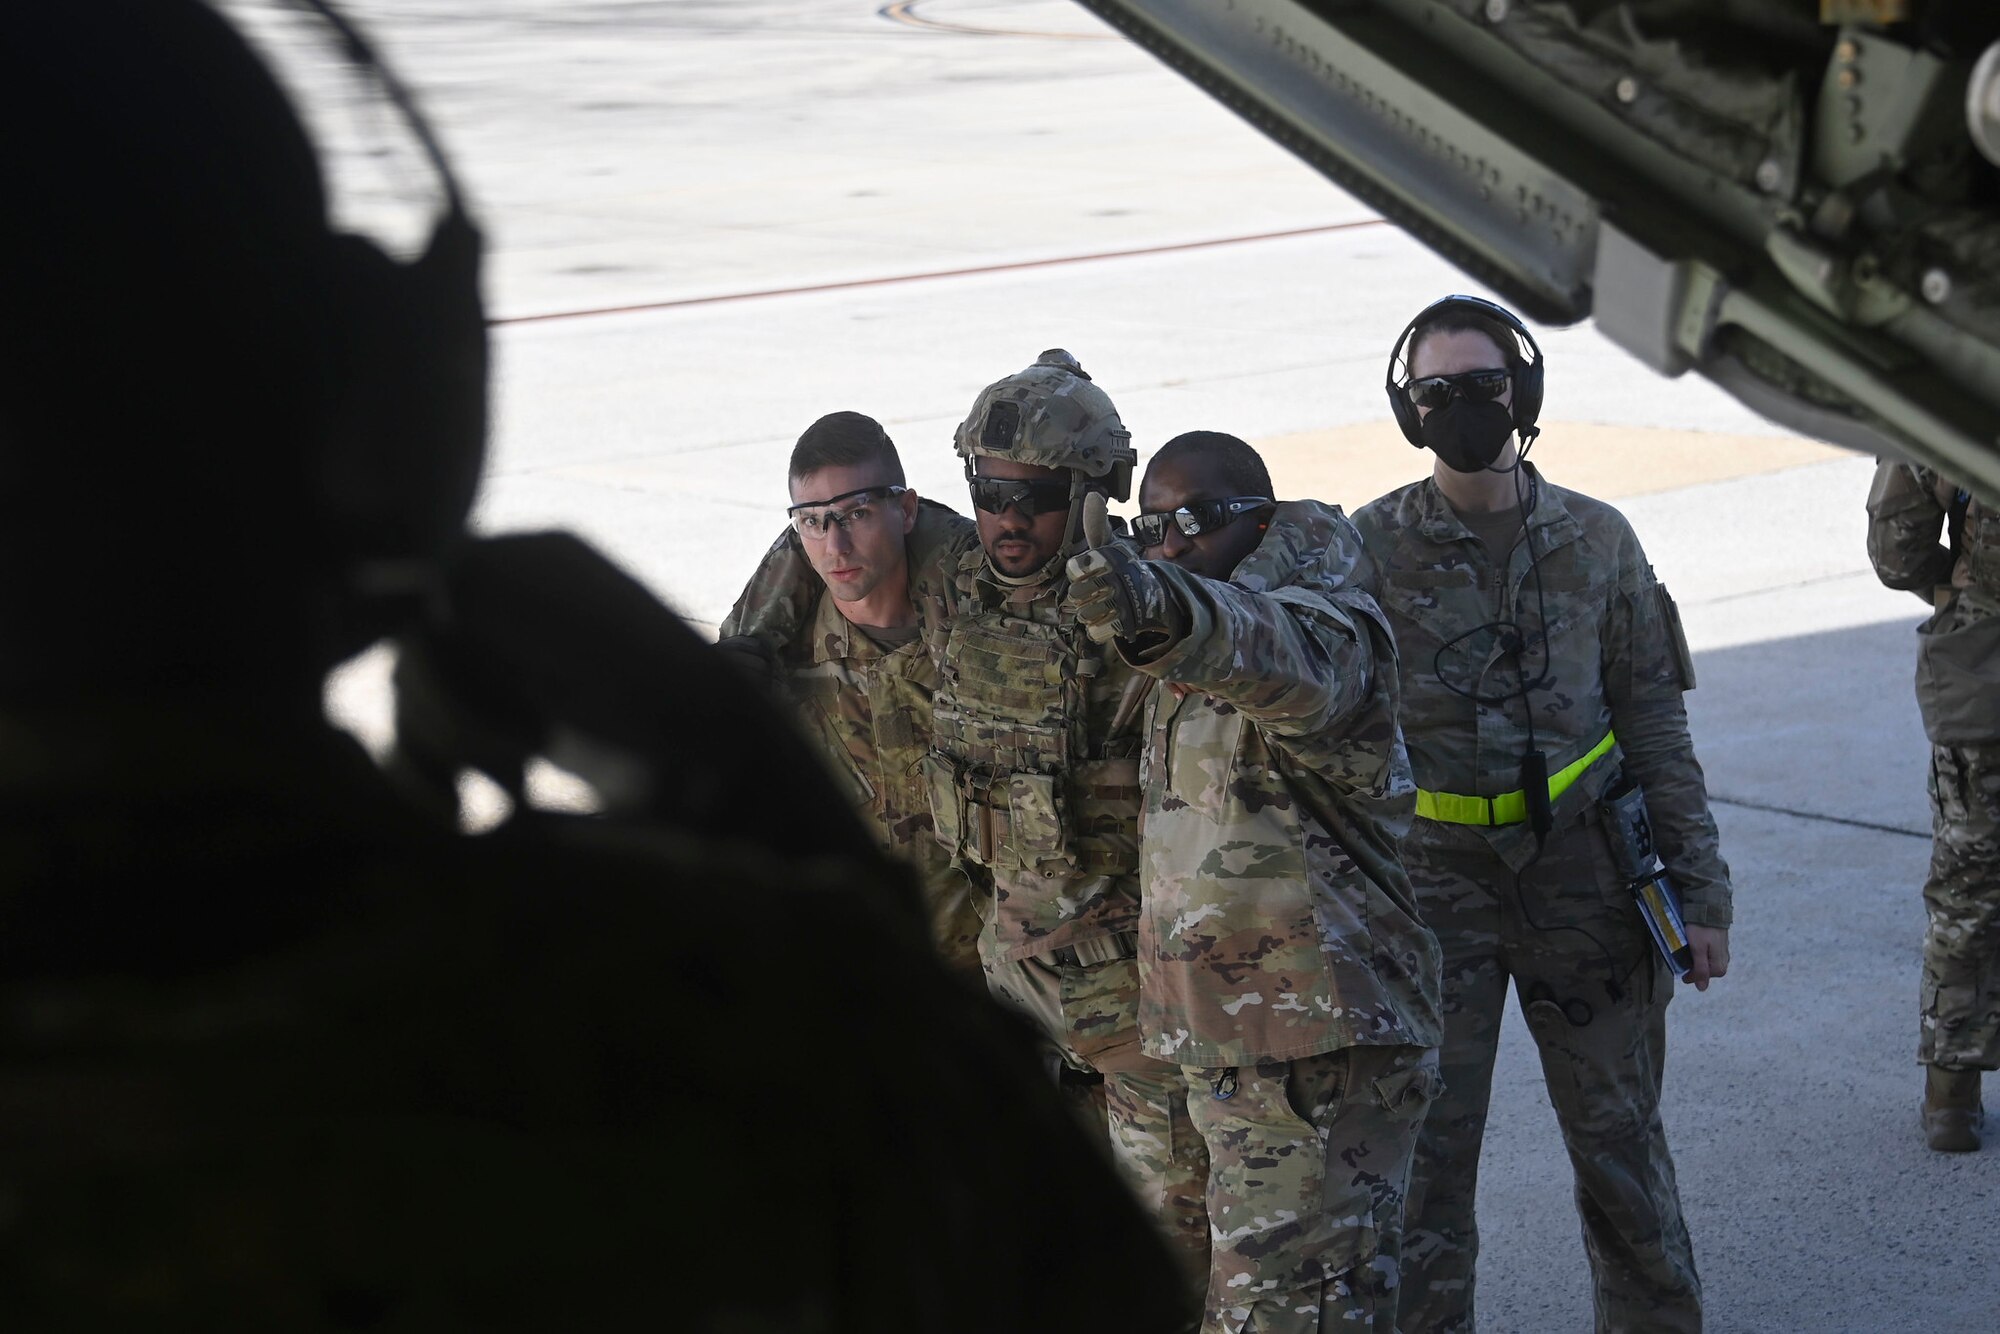 The 459th Aeromedical Evacuation Squadron recently conducted a local C-130T Aeromedical Evacuation static training mission here in conjunction with other 459th medical units, 459th Security Forces, active-duty Air Force, Air National Guard and Navy.